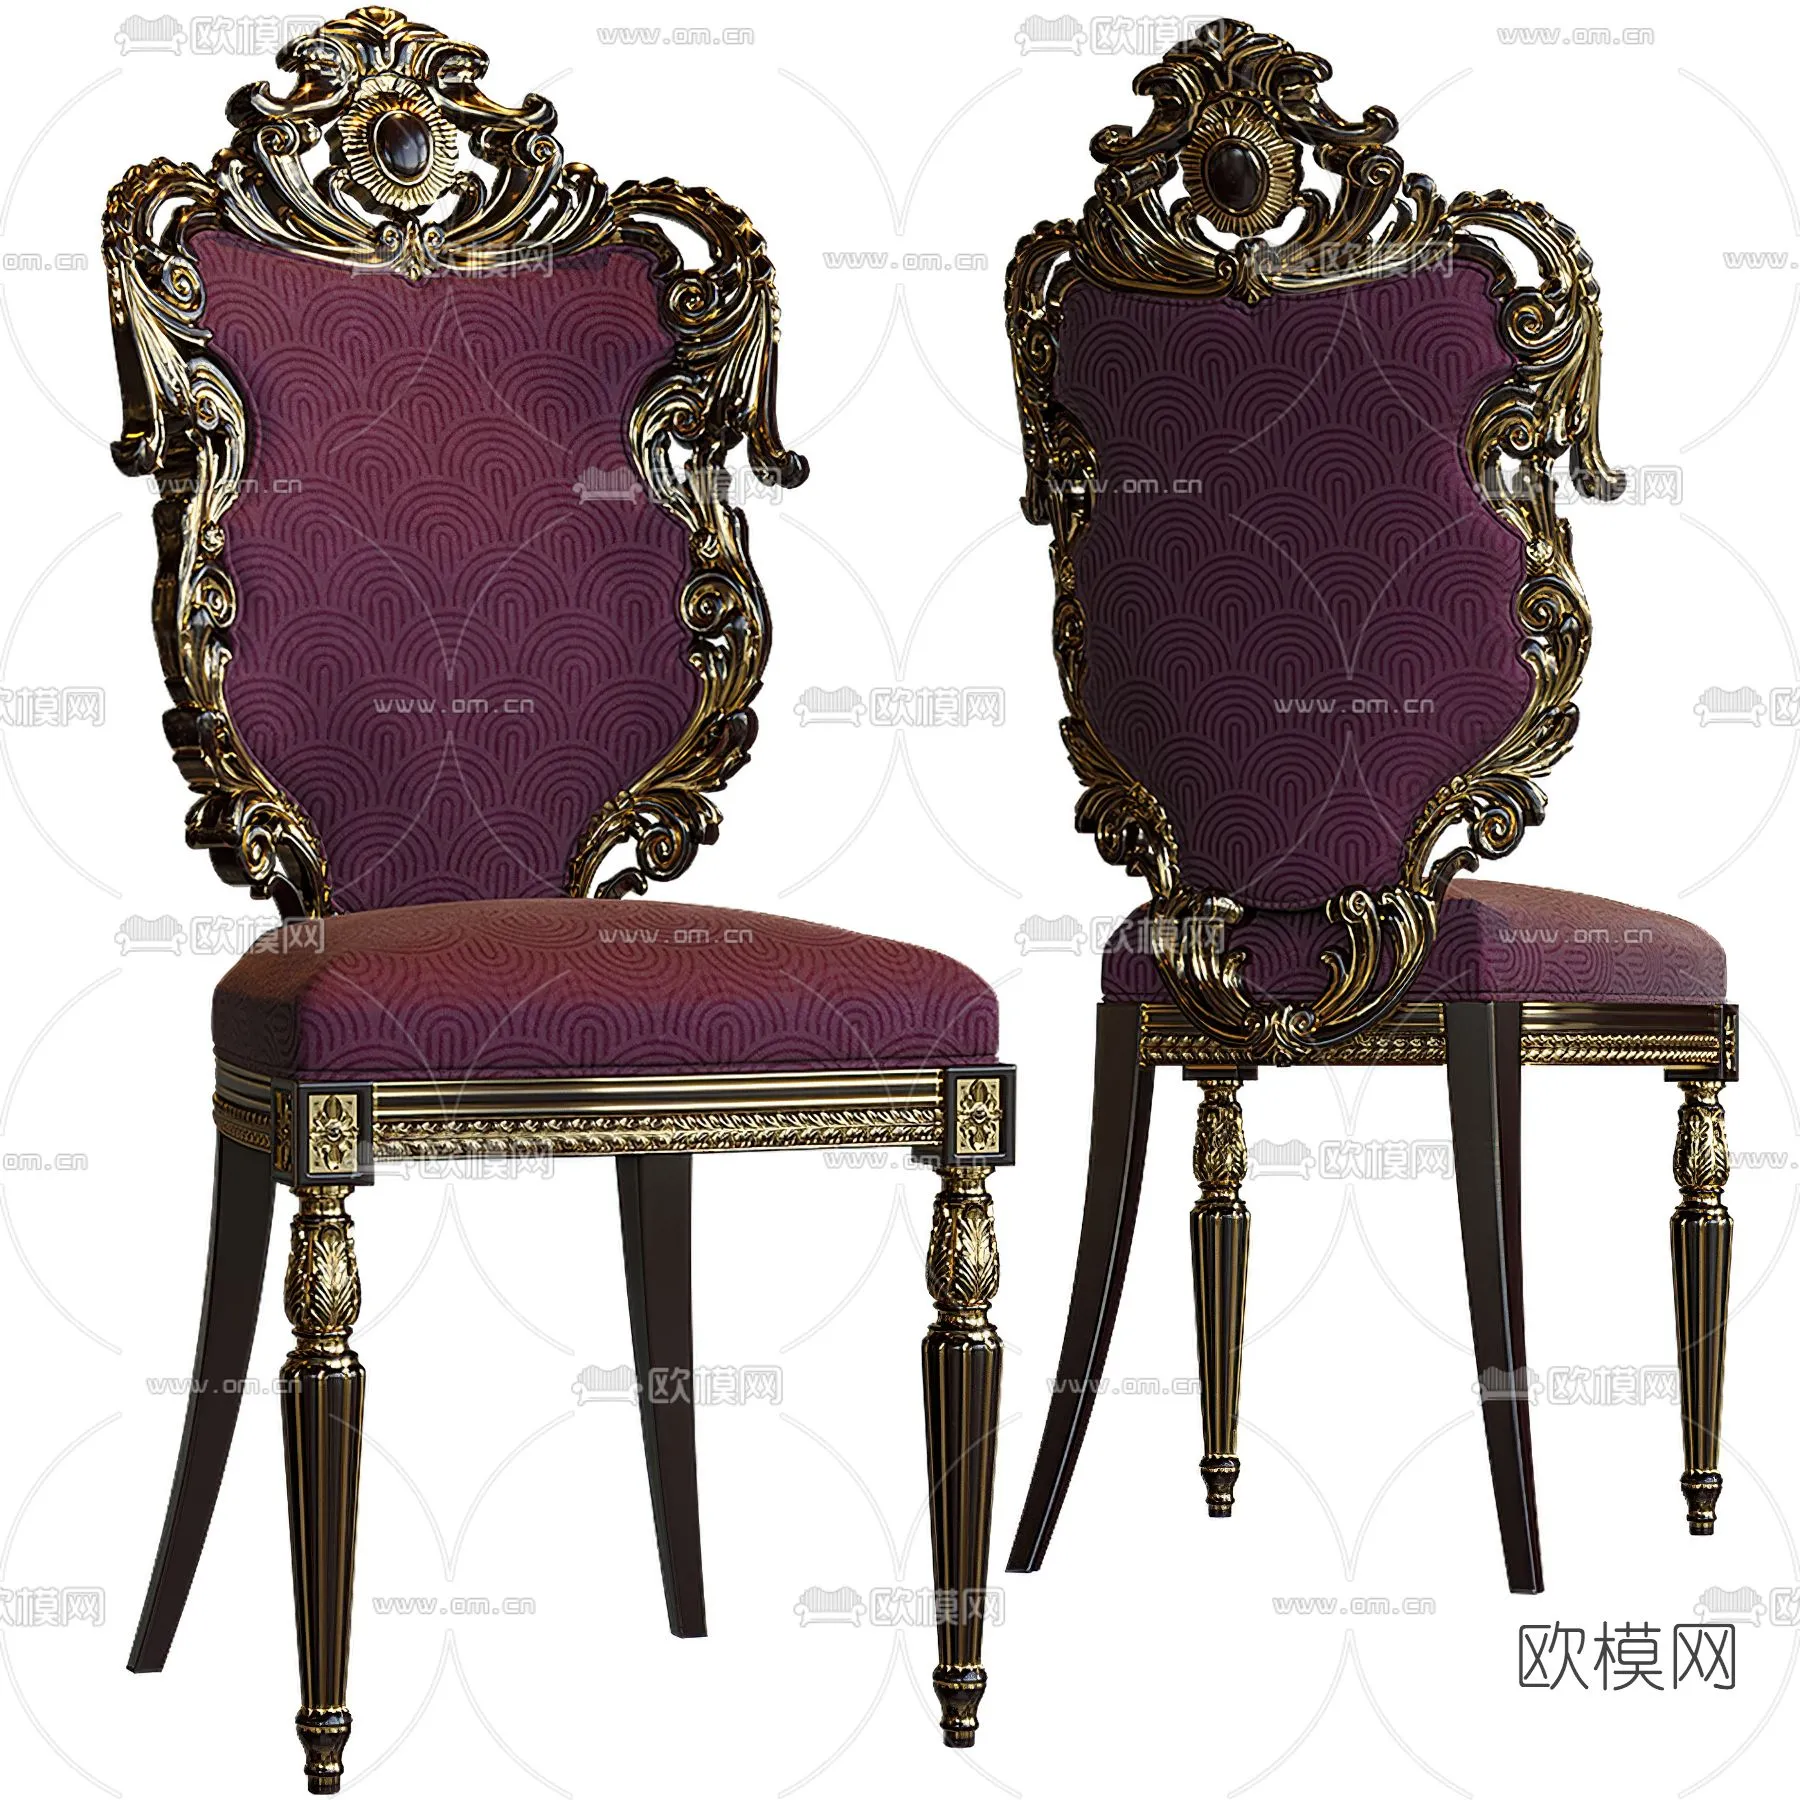 CLASSIC – DINING CHAIR 3DMODELS – 035